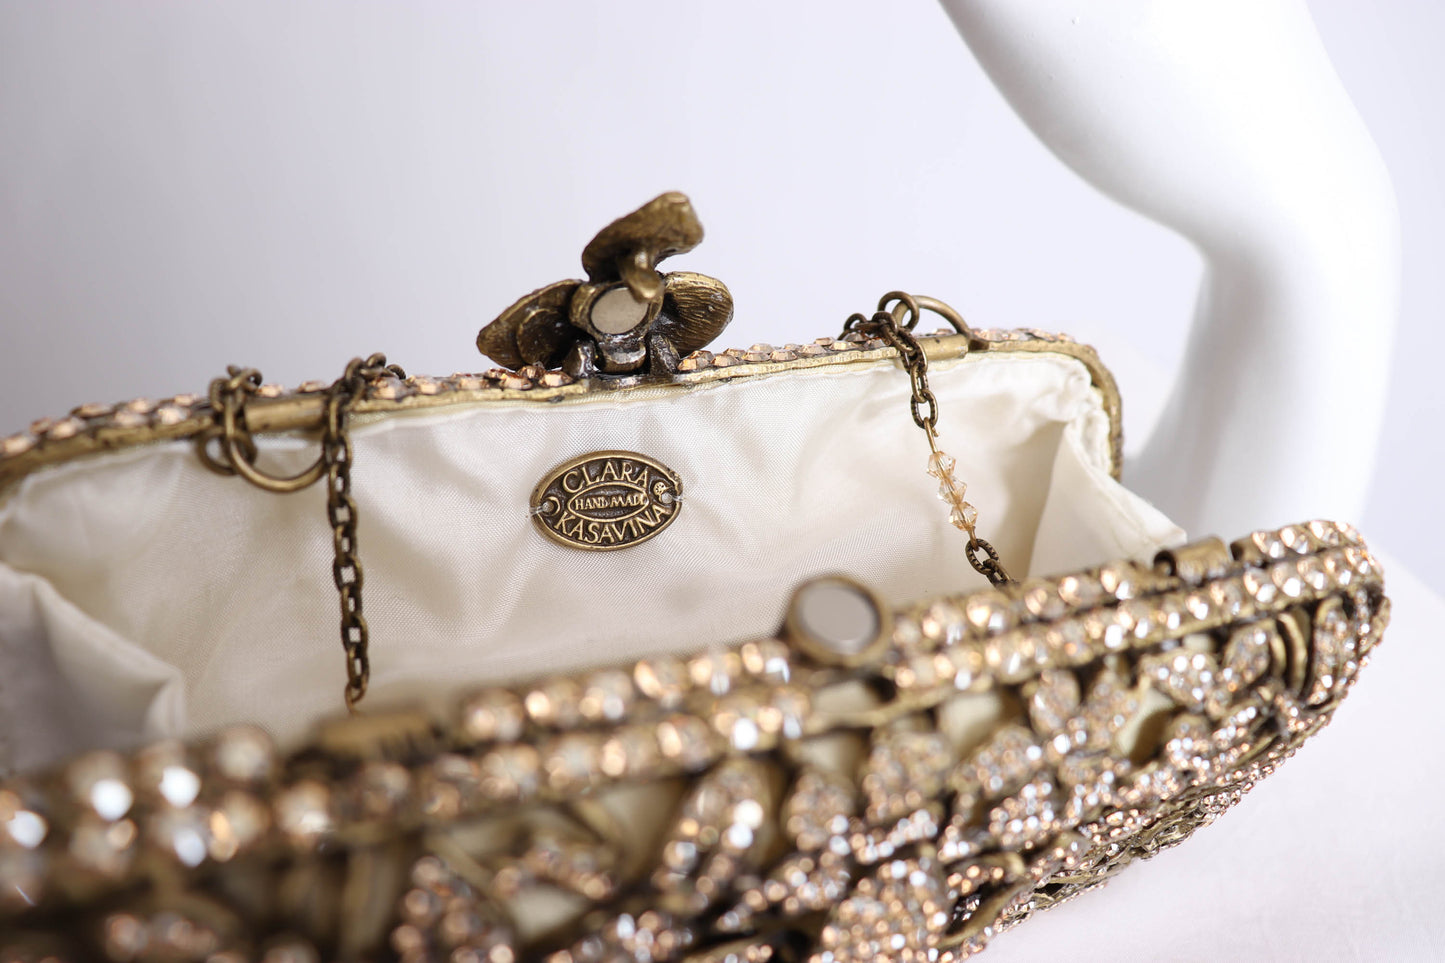 00's Gold Crystal Clutch